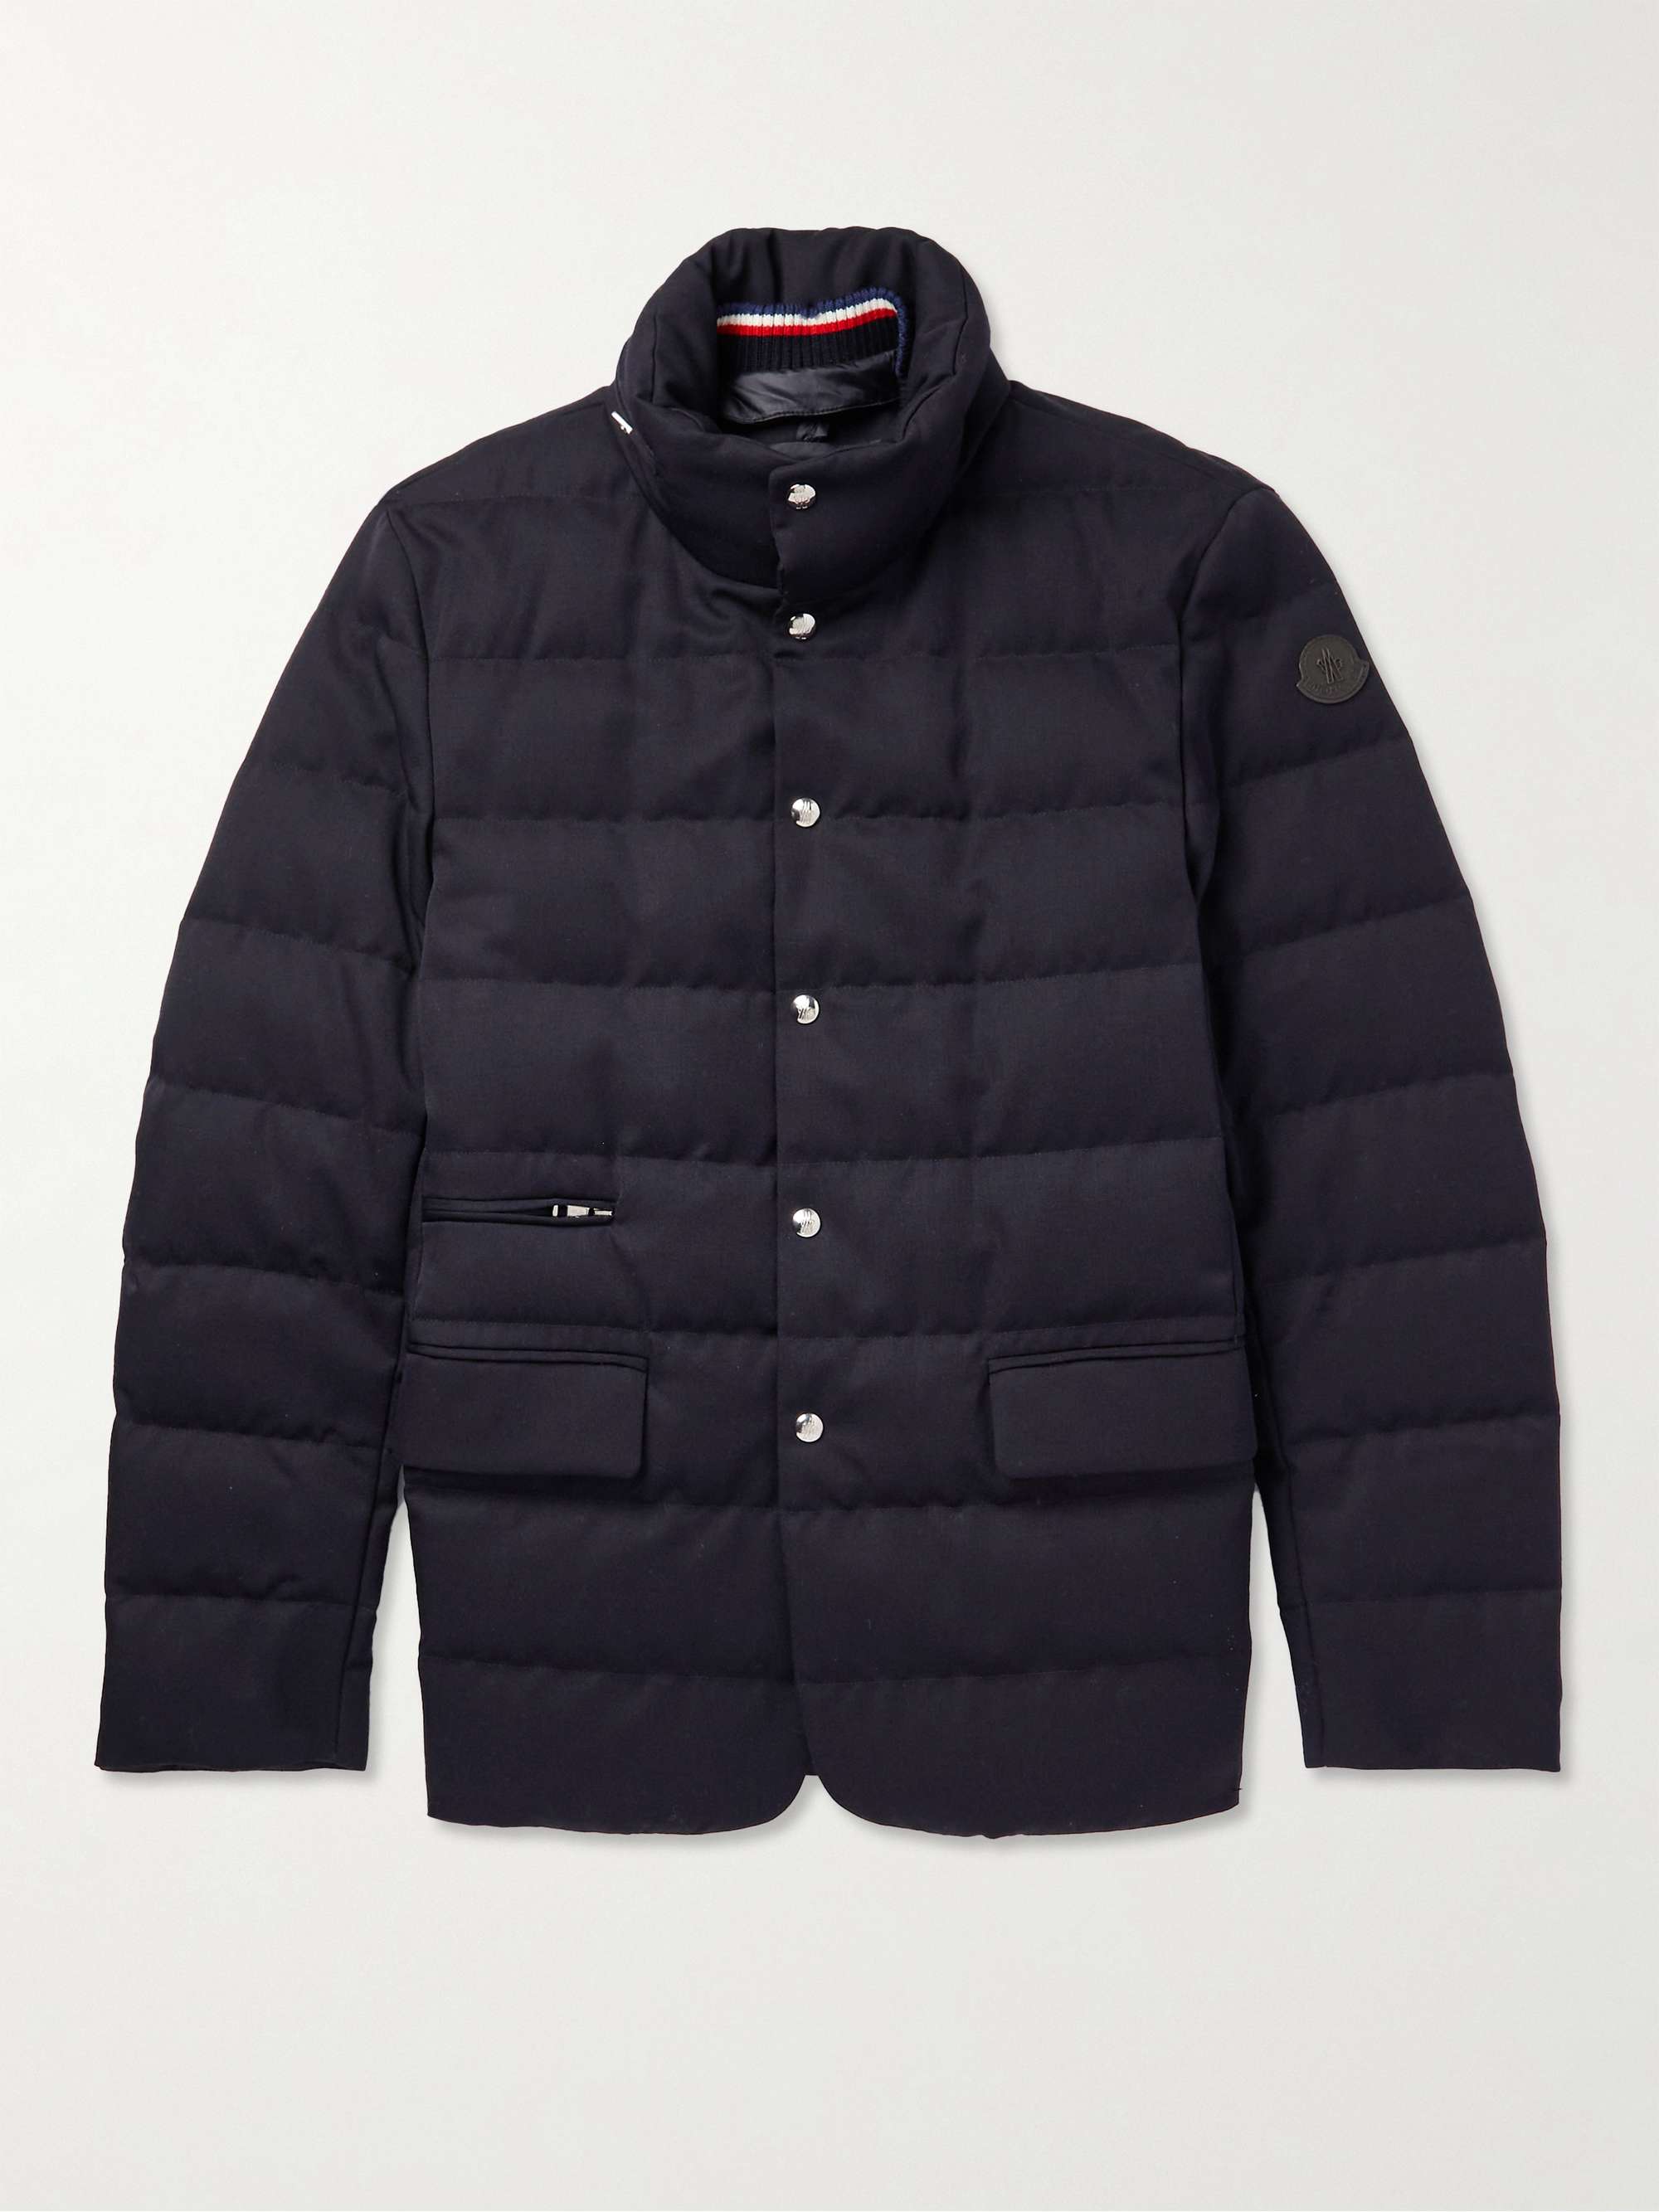 MONCLER Bess Convertible Nylon-Trimmed Quilted Wool Down Jacket | MR PORTER